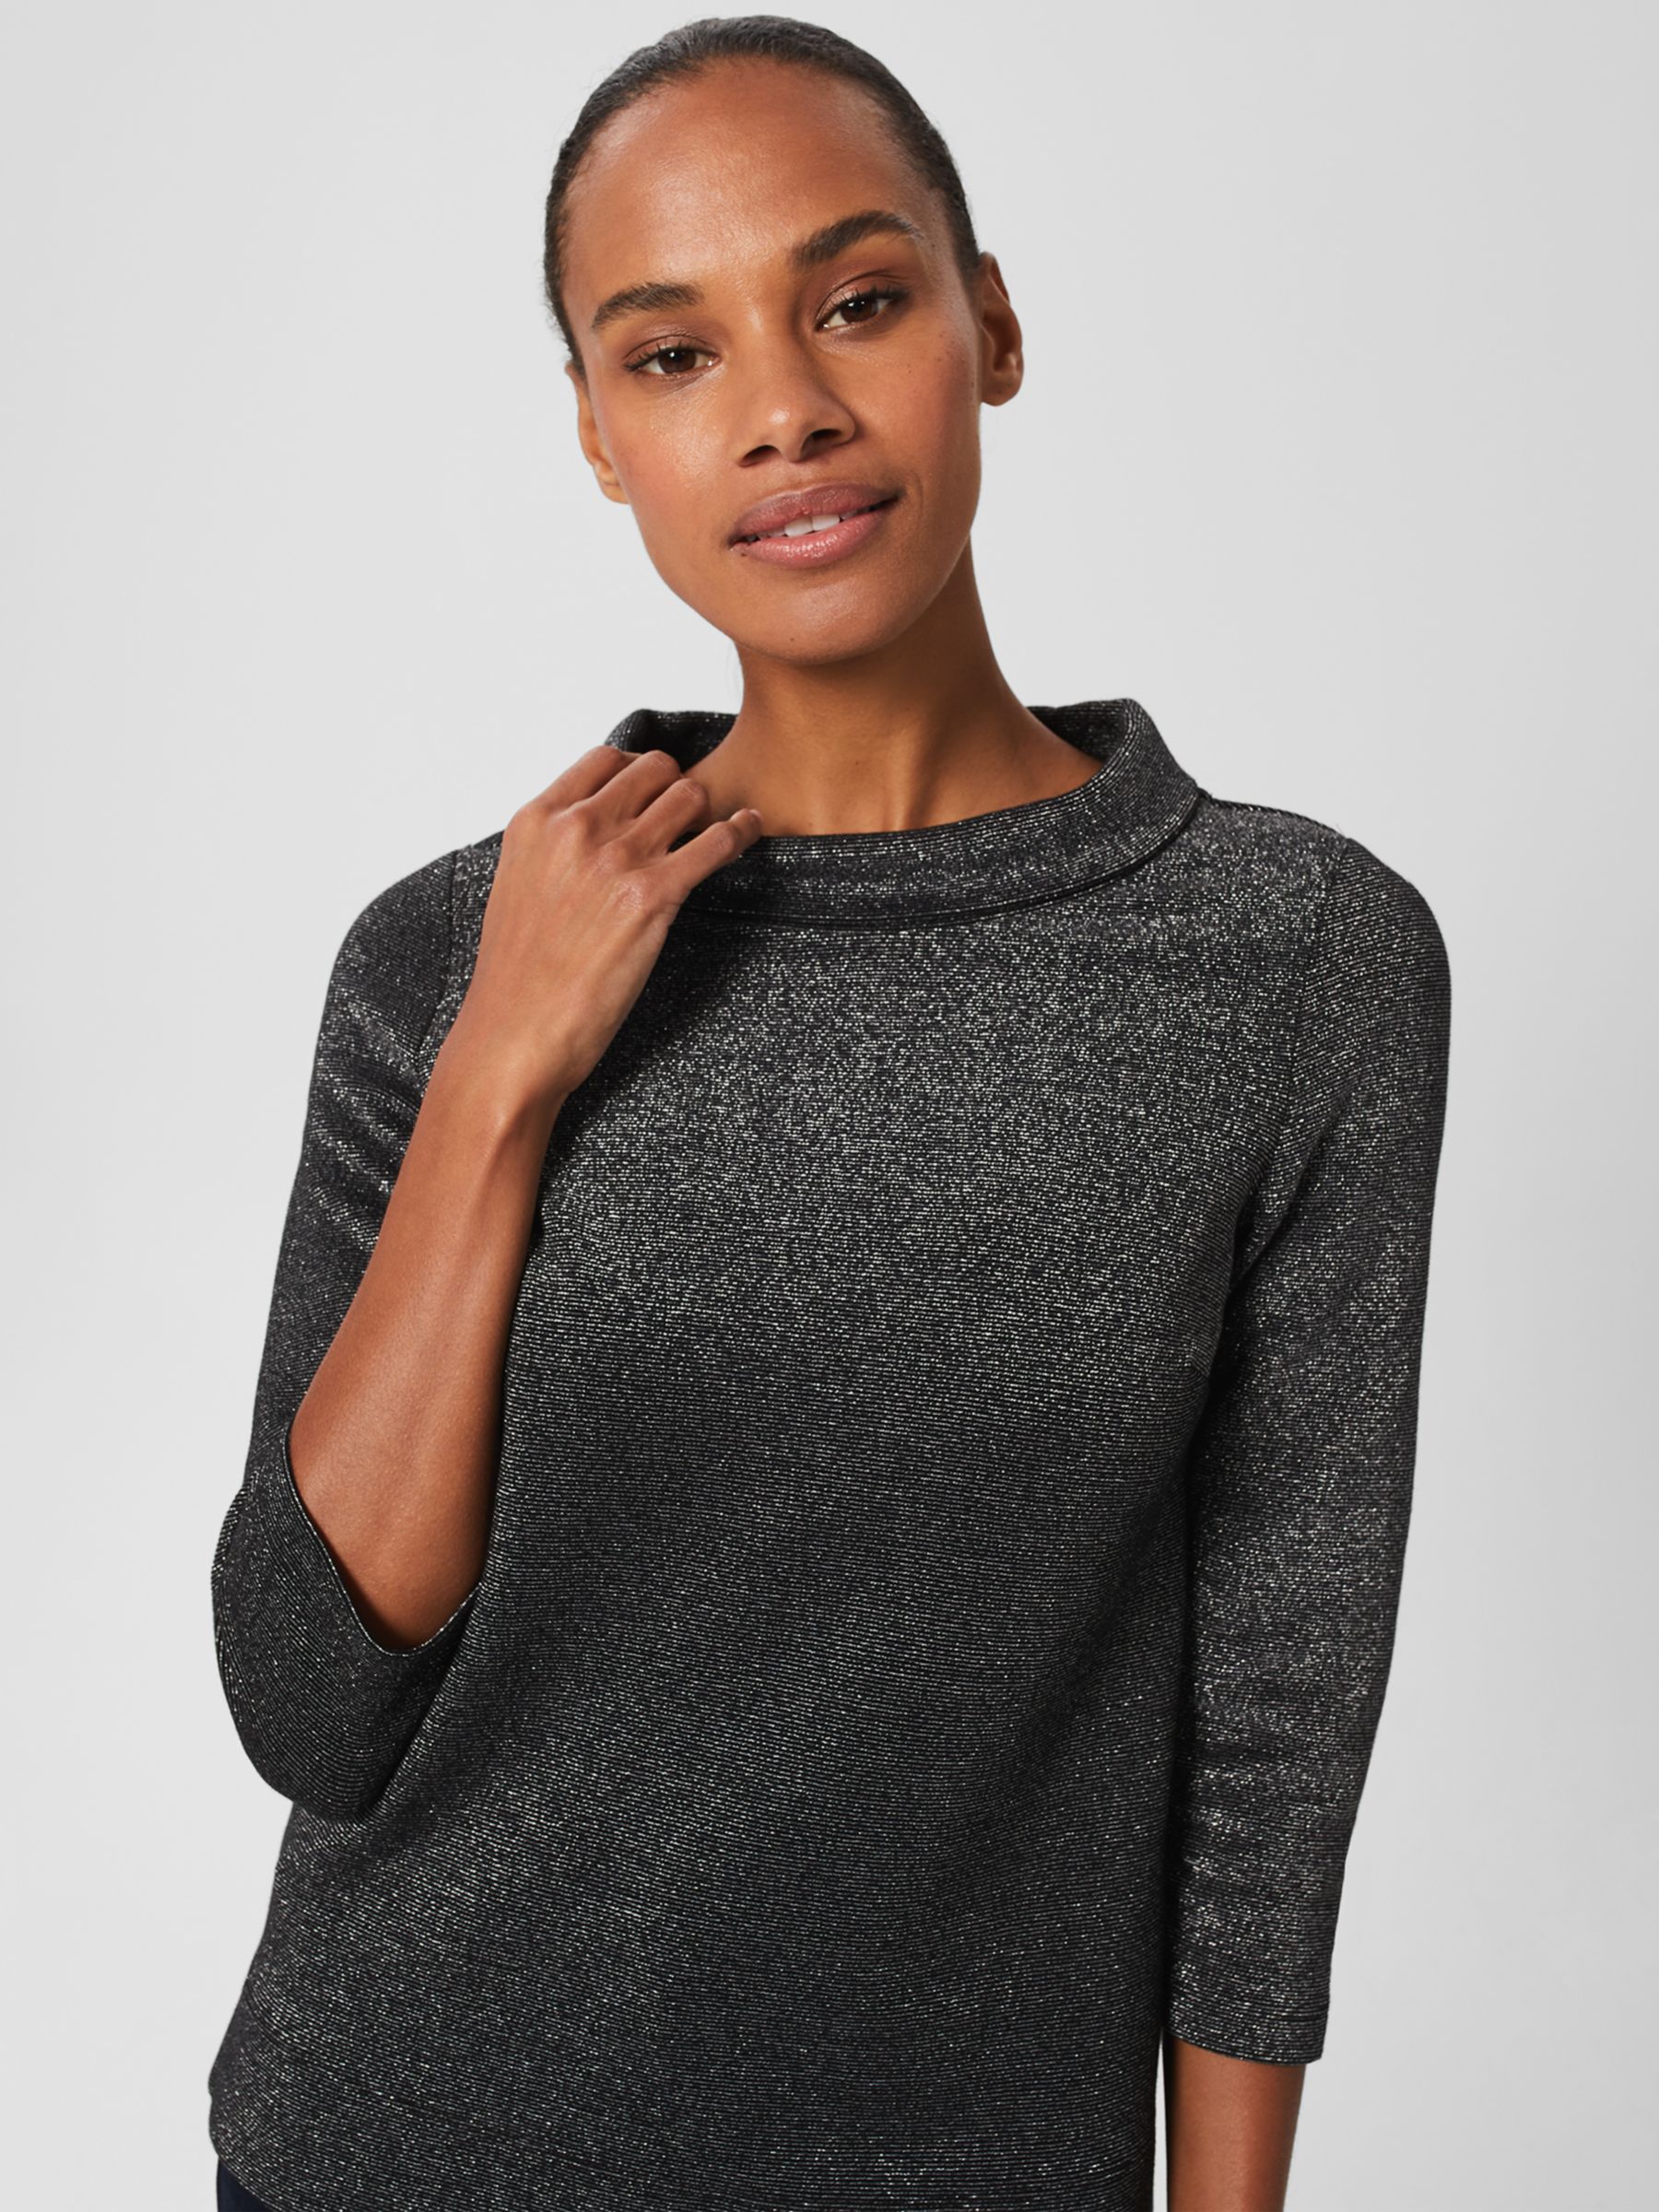 Hobbs Betsy Sparkle Roll Neck Top, Black/Silver at John Lewis & Partners